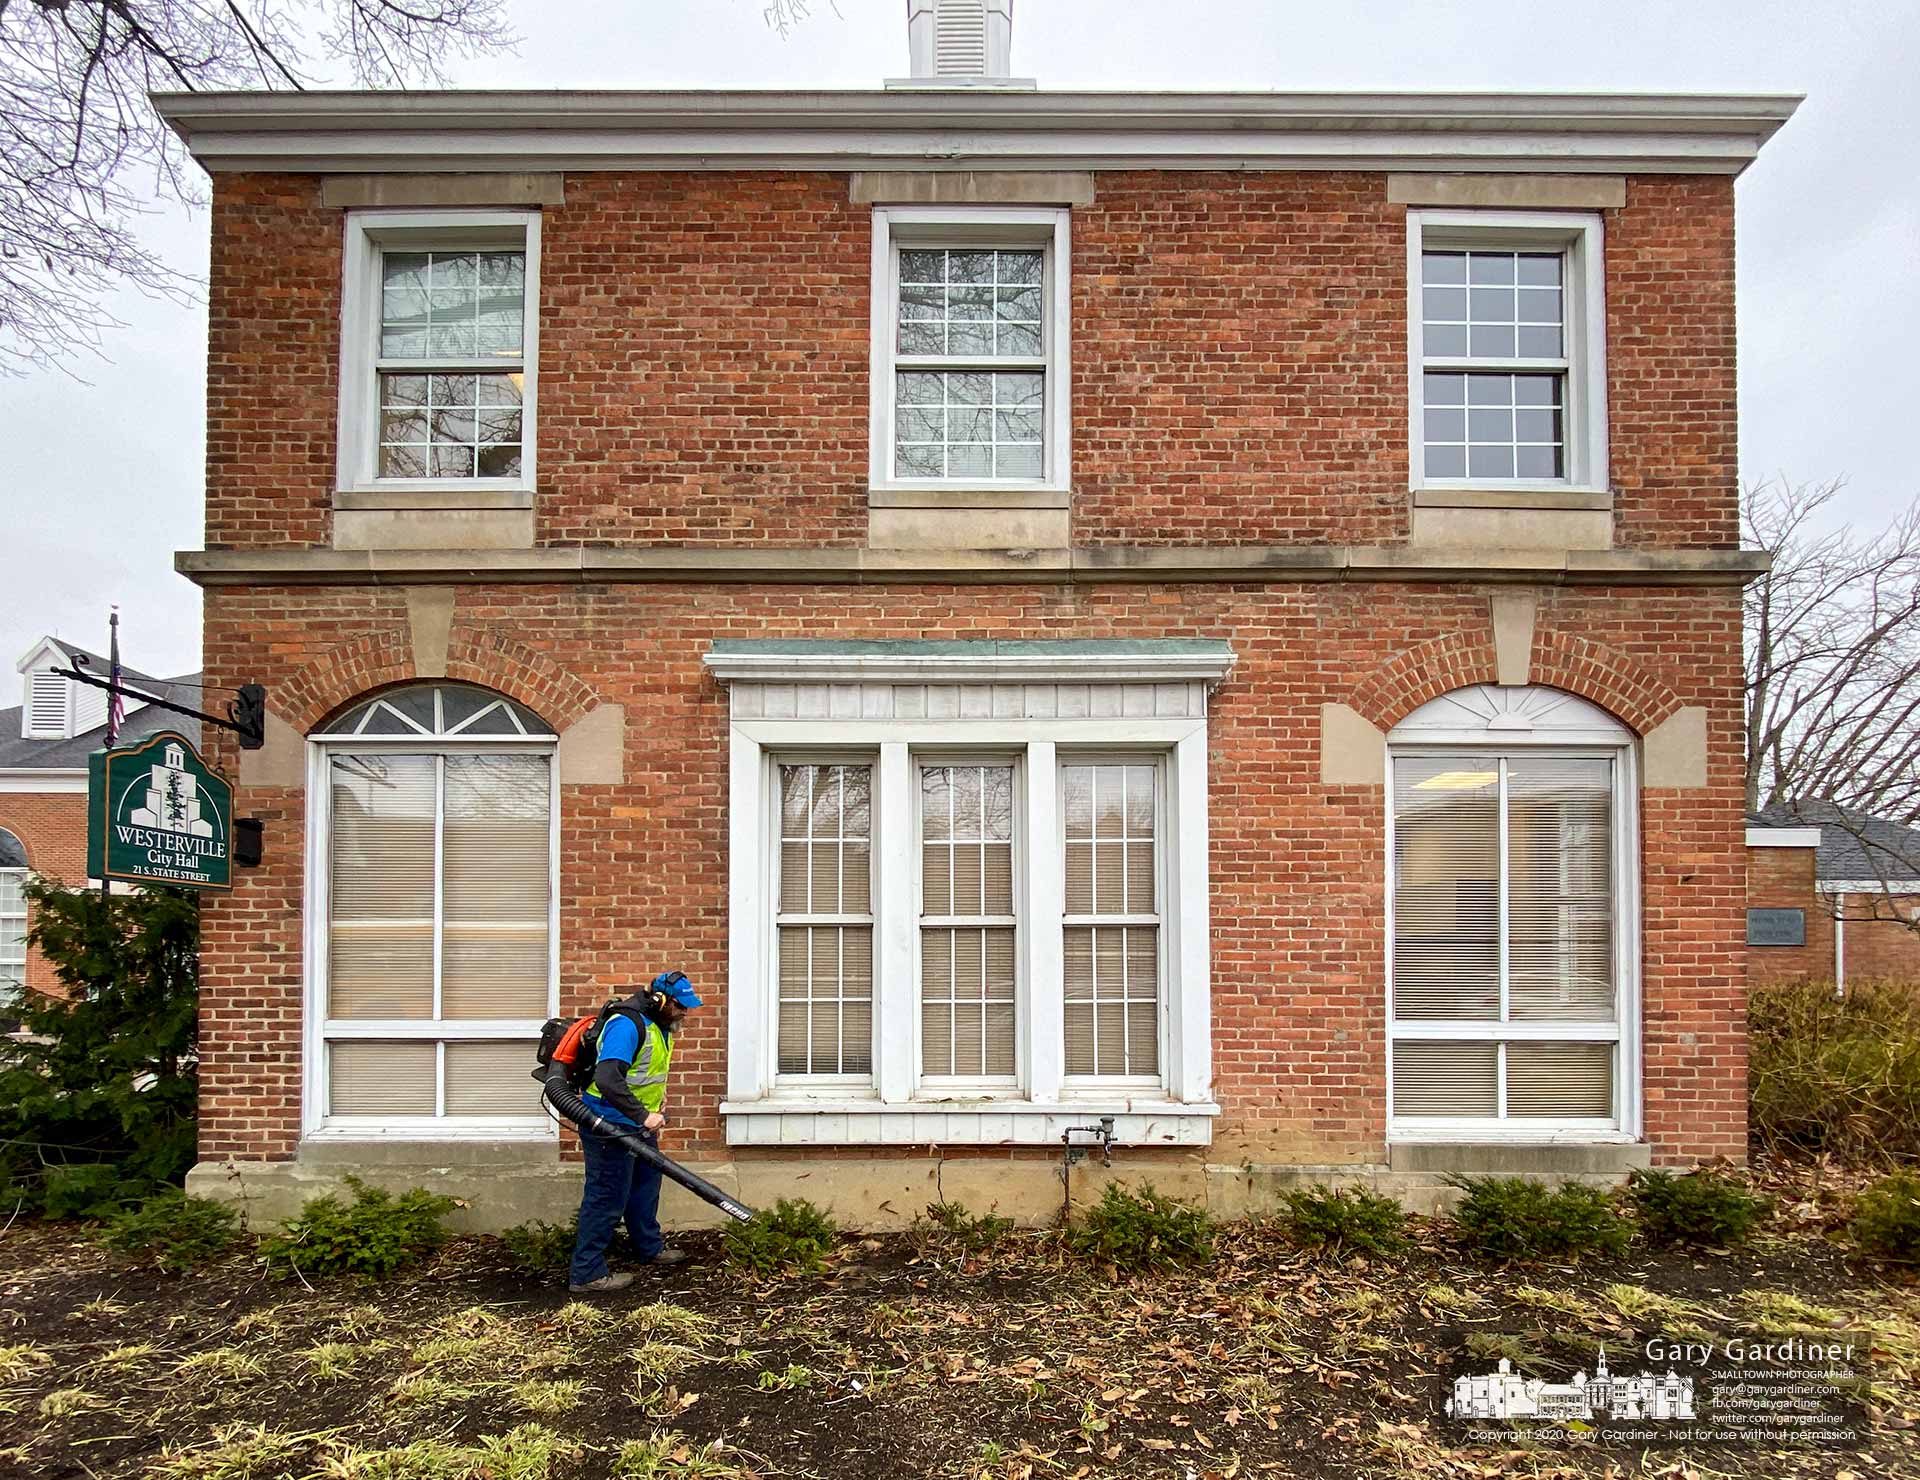 A landscaper clears leaves and garden debris from the front of city hall where a larger crew duplicated the work on other sections of the building and parking lot. My Final Photo for Jan. 29, 2020.